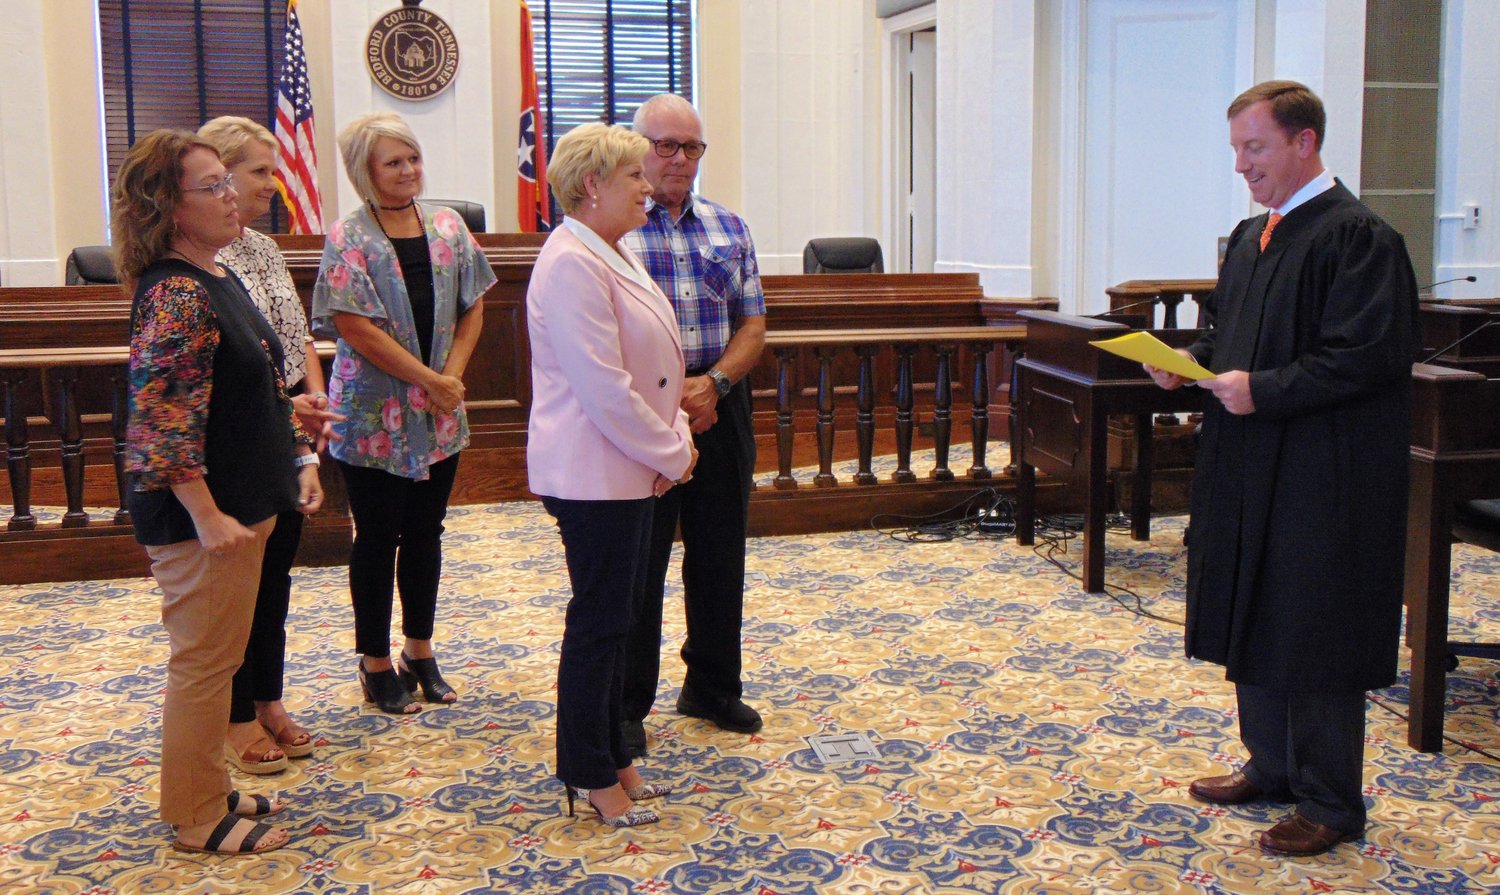 Tonya Davis was sworn in recently along with other county officials by Judge Wyatt Burk.